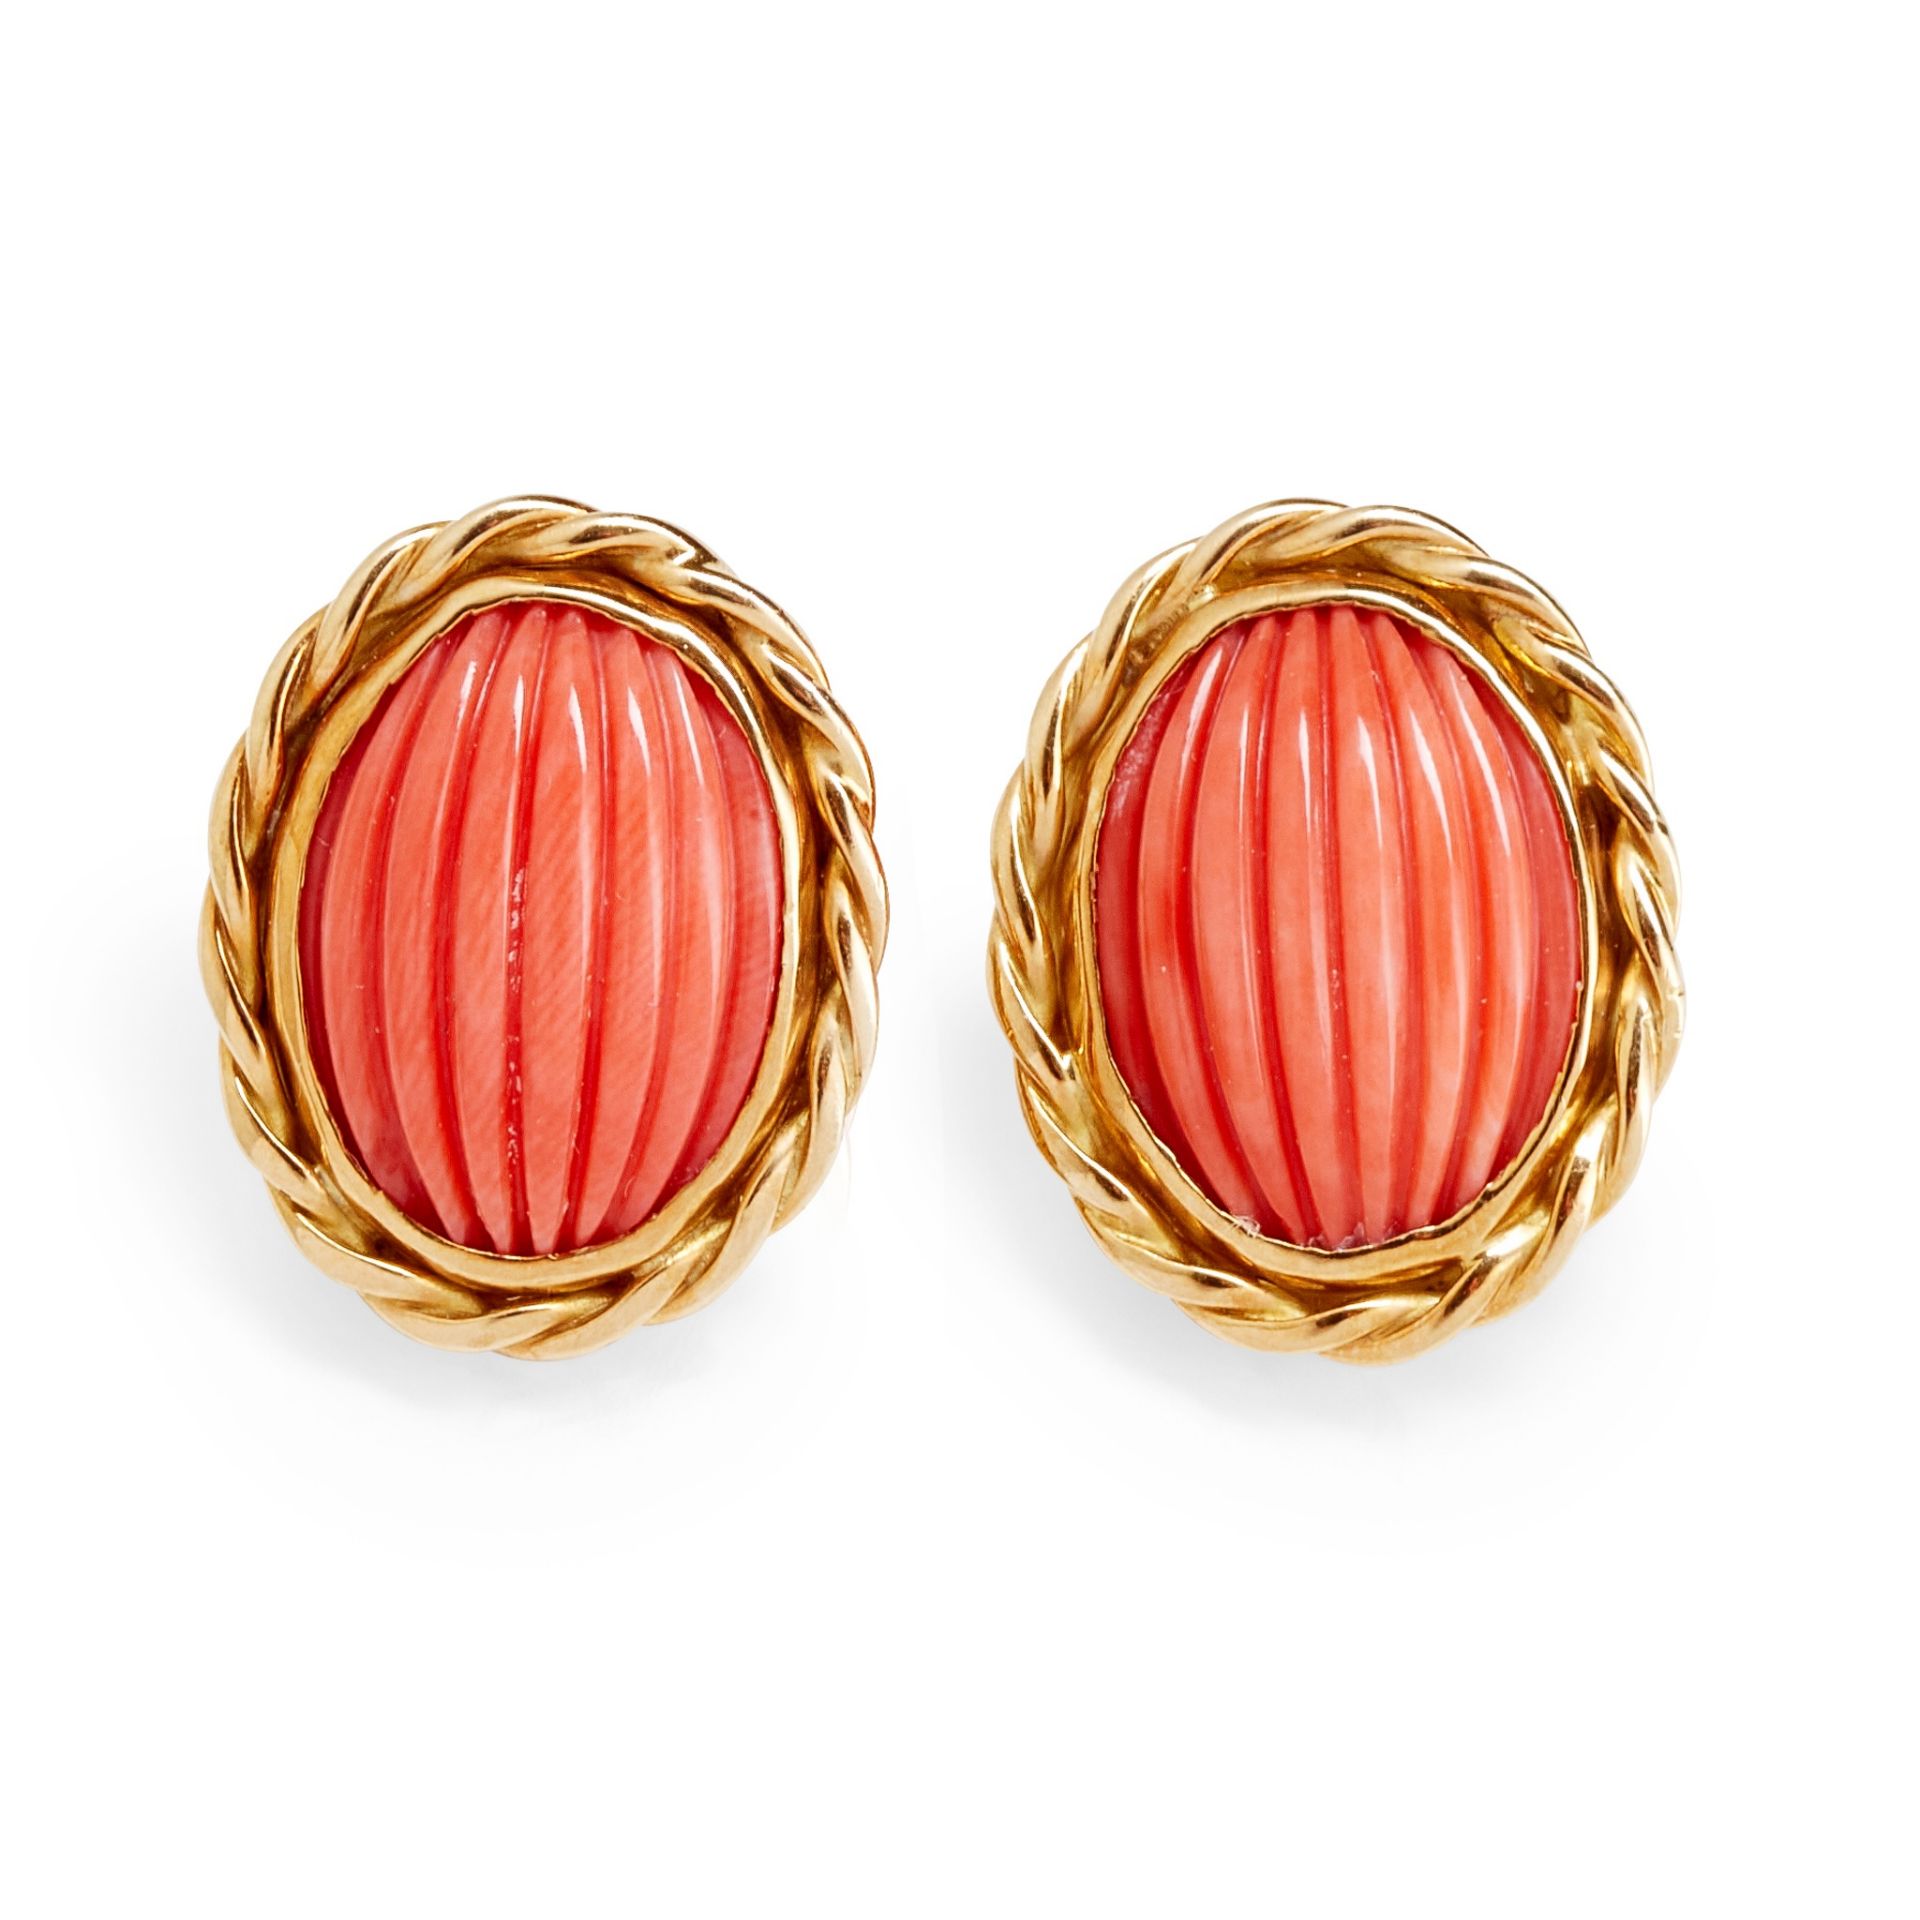 A pair of 18ct gold coral earrings, Eric N Smith